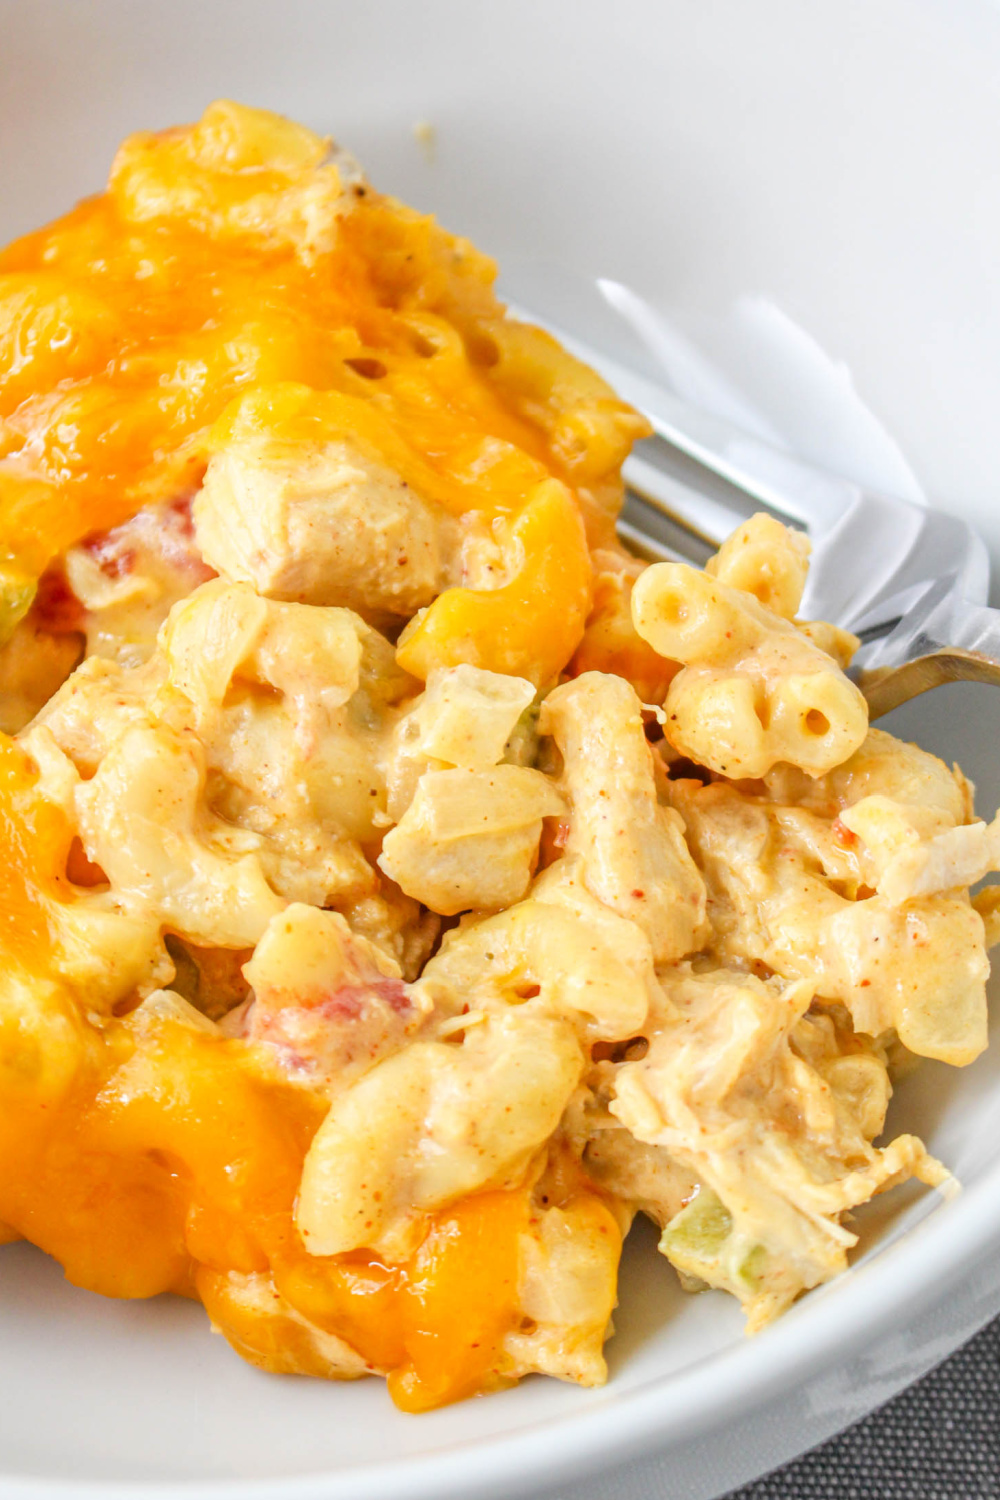 Ranch Mac and Cheese with chicken is an easy recipe loaded with zesty flavor throughout the creamy cheese sauce. Your family will love it! via @jugglingactmama